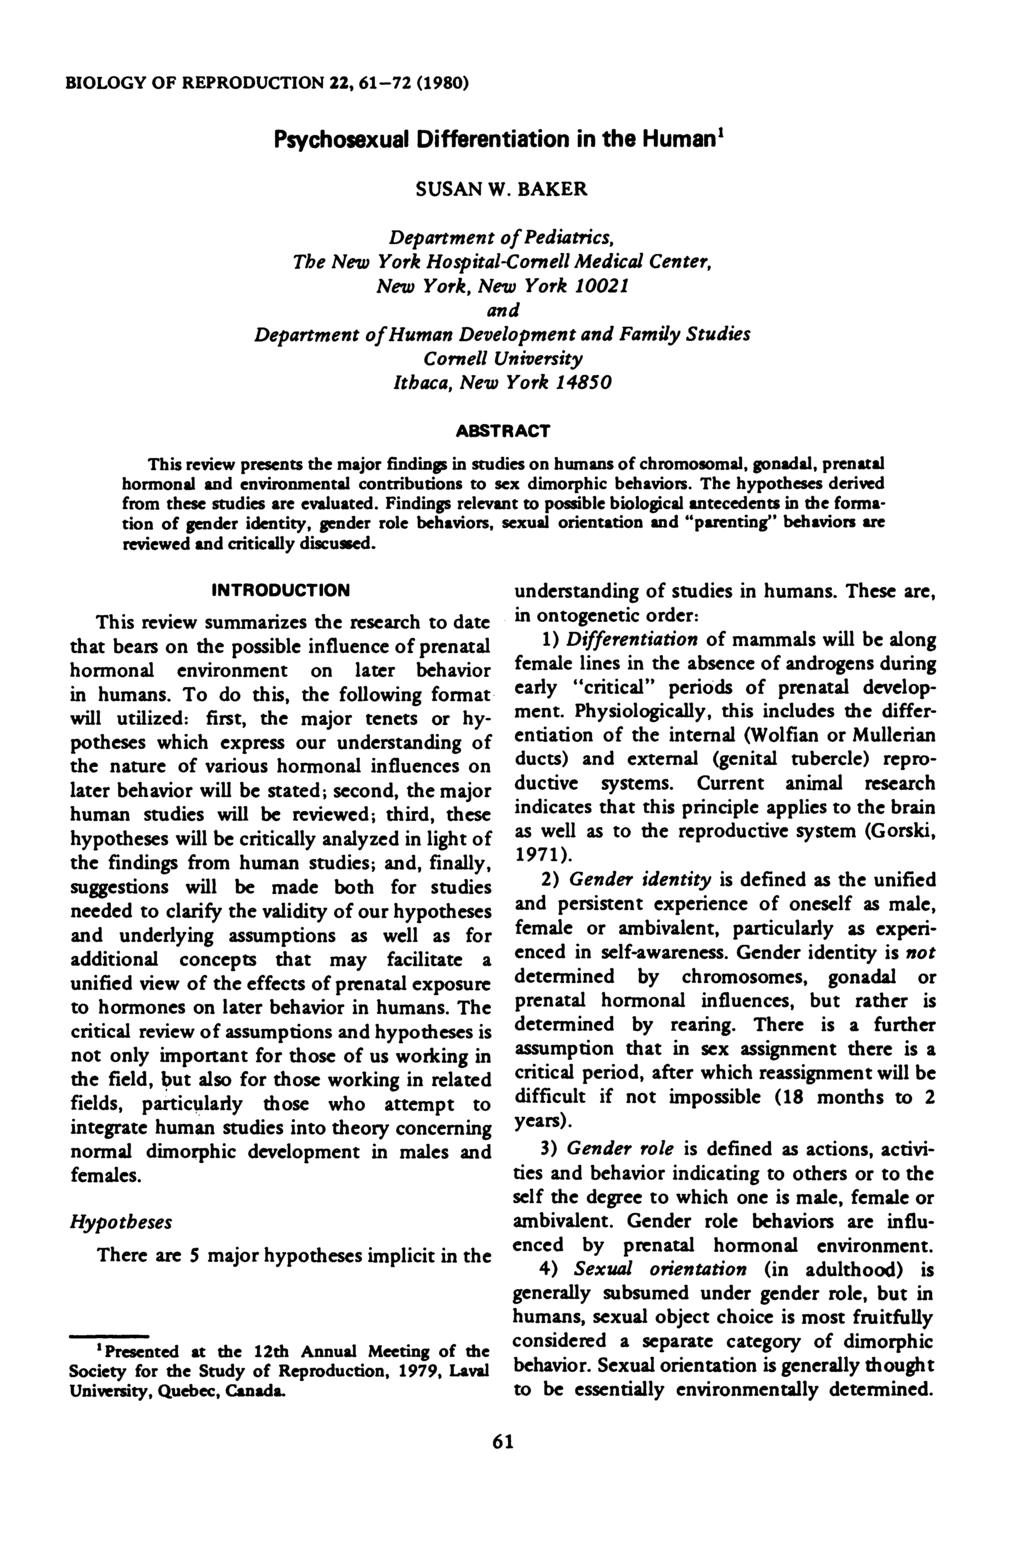 BIOLOGY OF REPRODUCTION 22, 61-72 (1980) Psychosexual Differentiation in the Human1 SUSAN W.